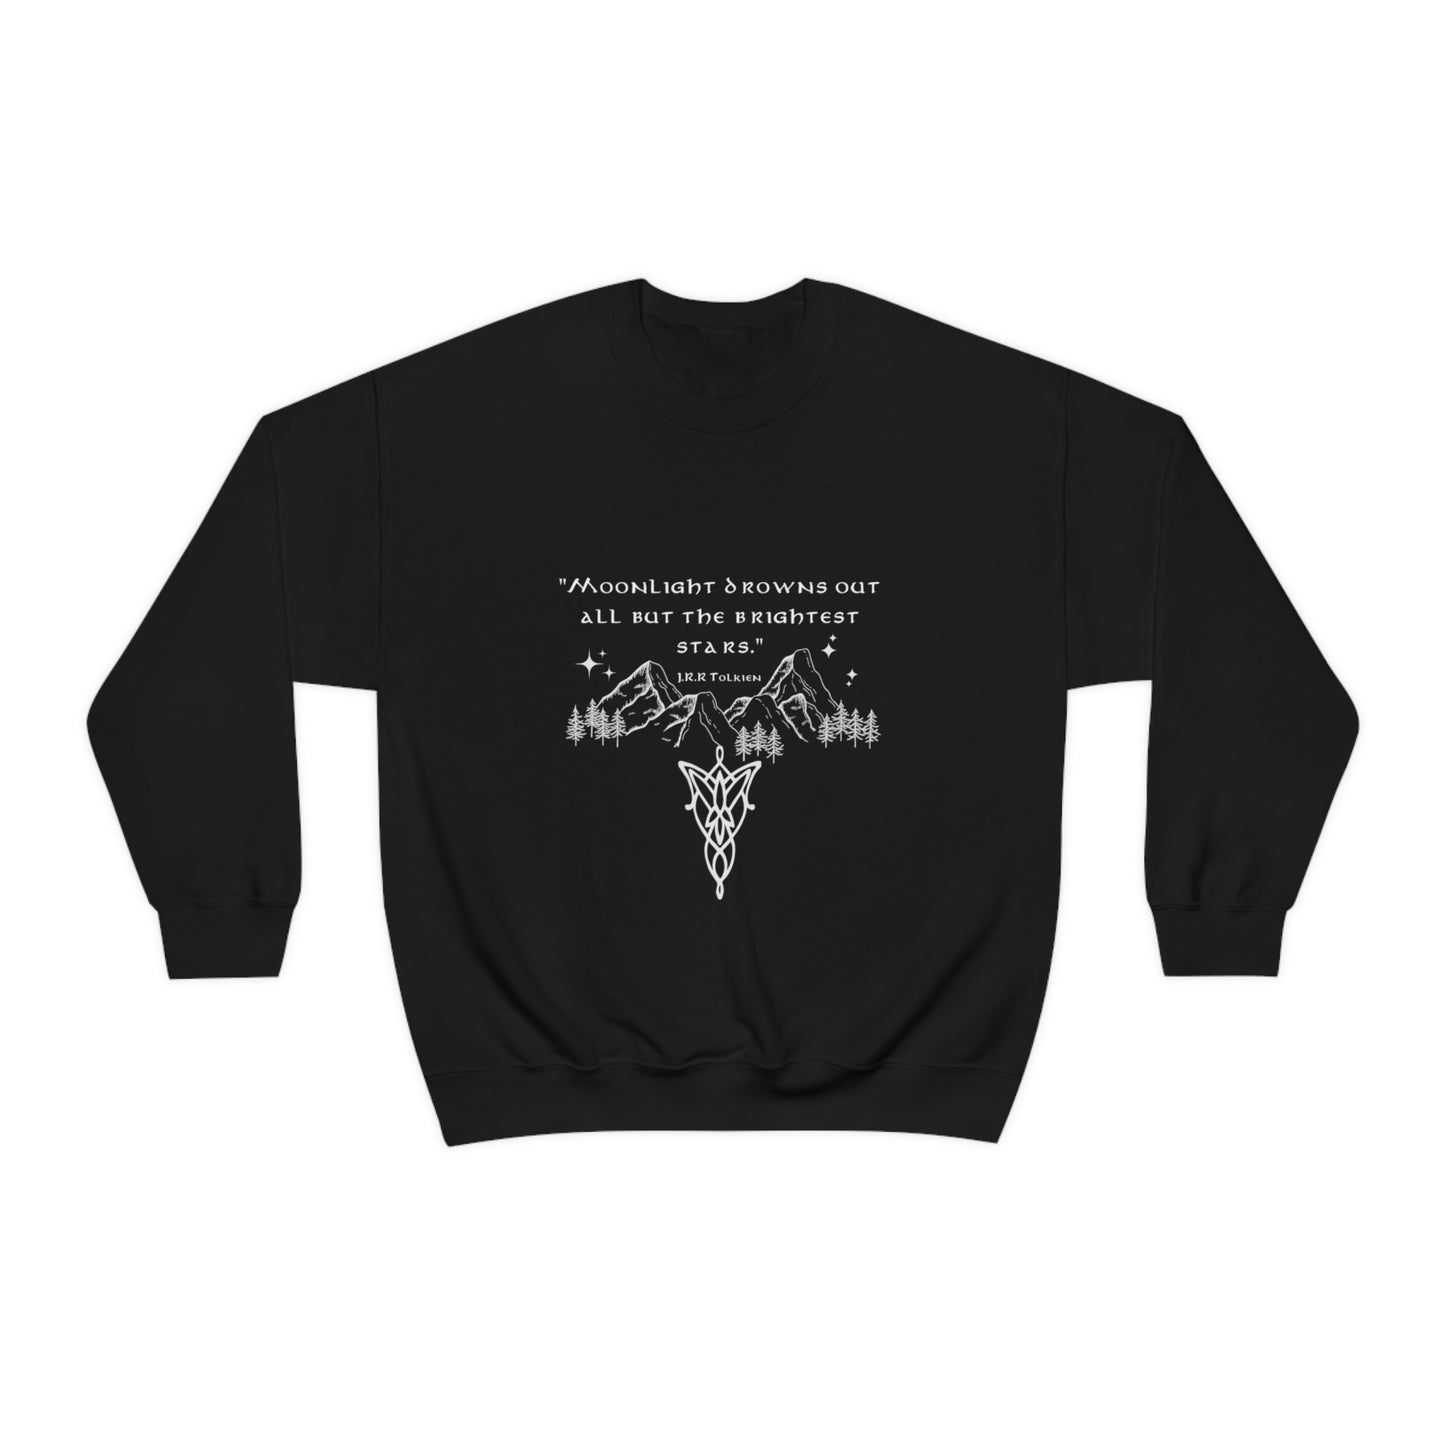 "MOONLIGHT DORWNS OUT ALL BUT THE BRIGHTEST STARS" sweatshirt